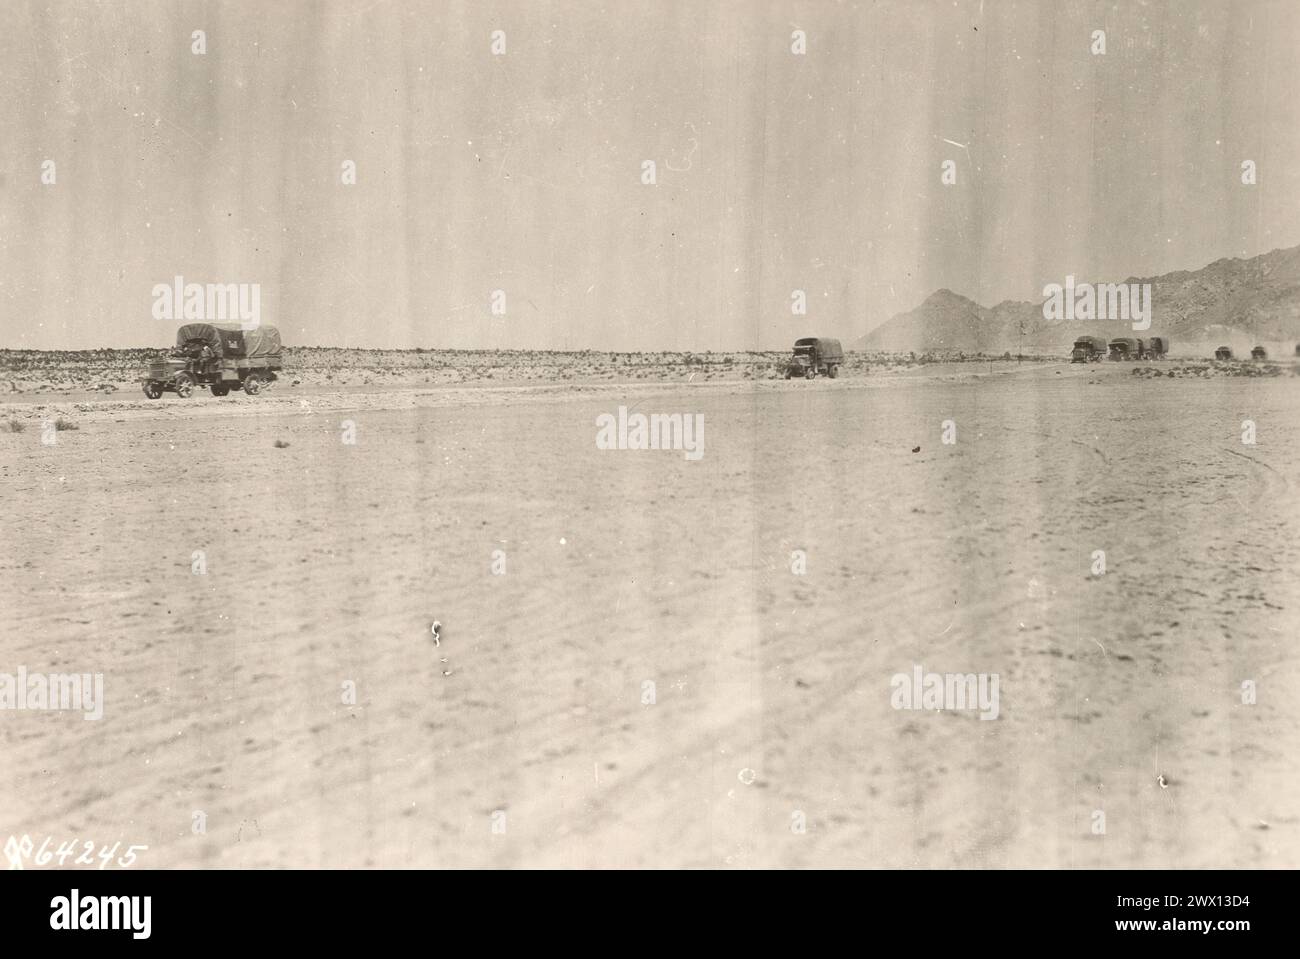 MOTOR CONVOY TRIP. Taken as the convoy entered the Great Salt Lake Desert at the Sieberling Cutt-off ca. August 1919 Stock Photo